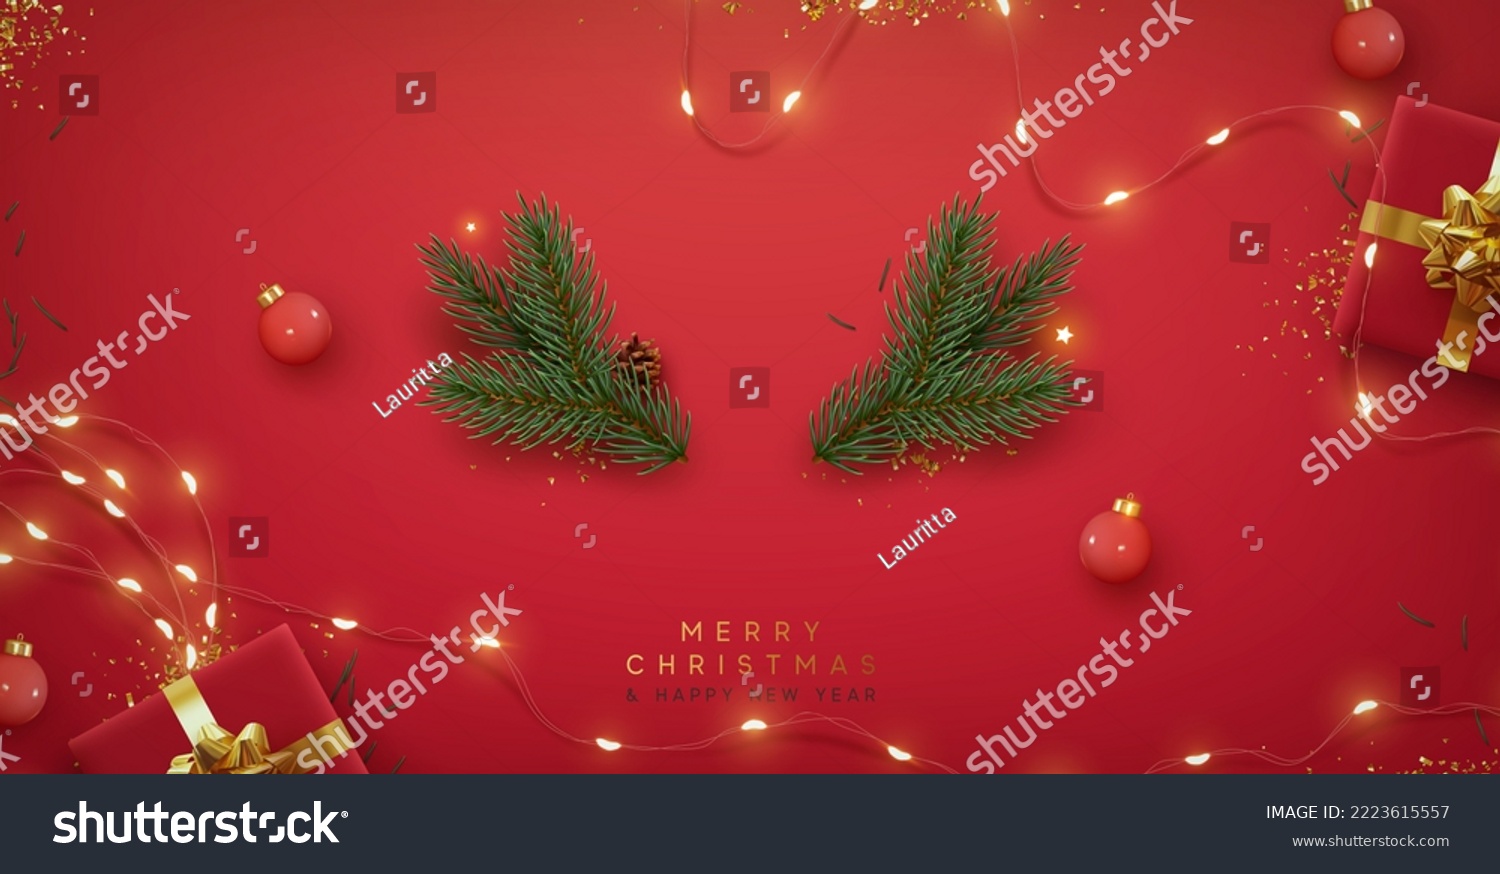 Christmas red background with realistic 3d decorative design elements. Festive Xmas composition flat top view of red gift boxes, glowing garland decorations, green tree branches. Vector illustration #2223615557